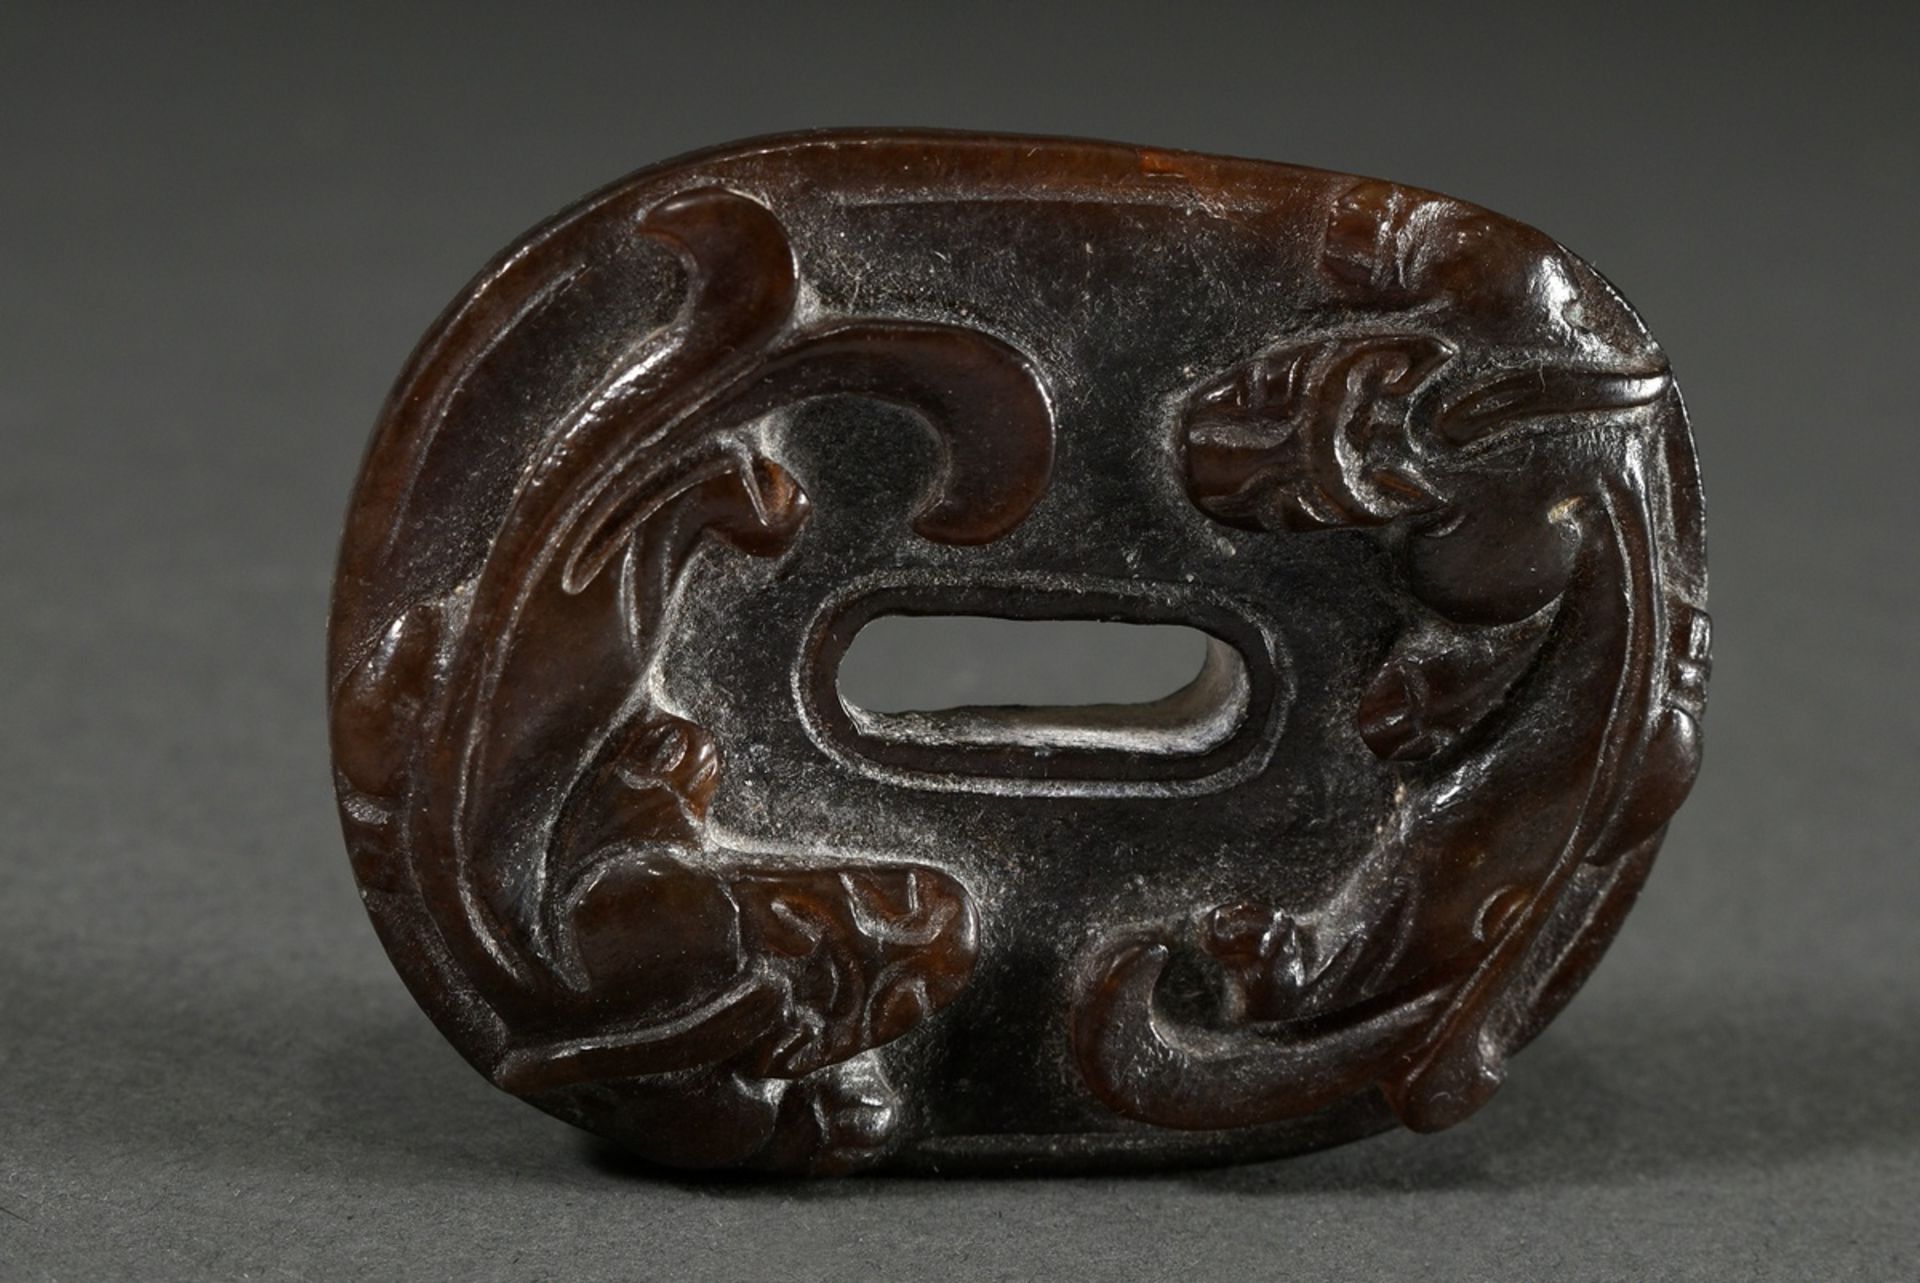 Oval dark brown jade in the shape of a Han period sword engraving with rain dragons and C ornaments - Image 3 of 3